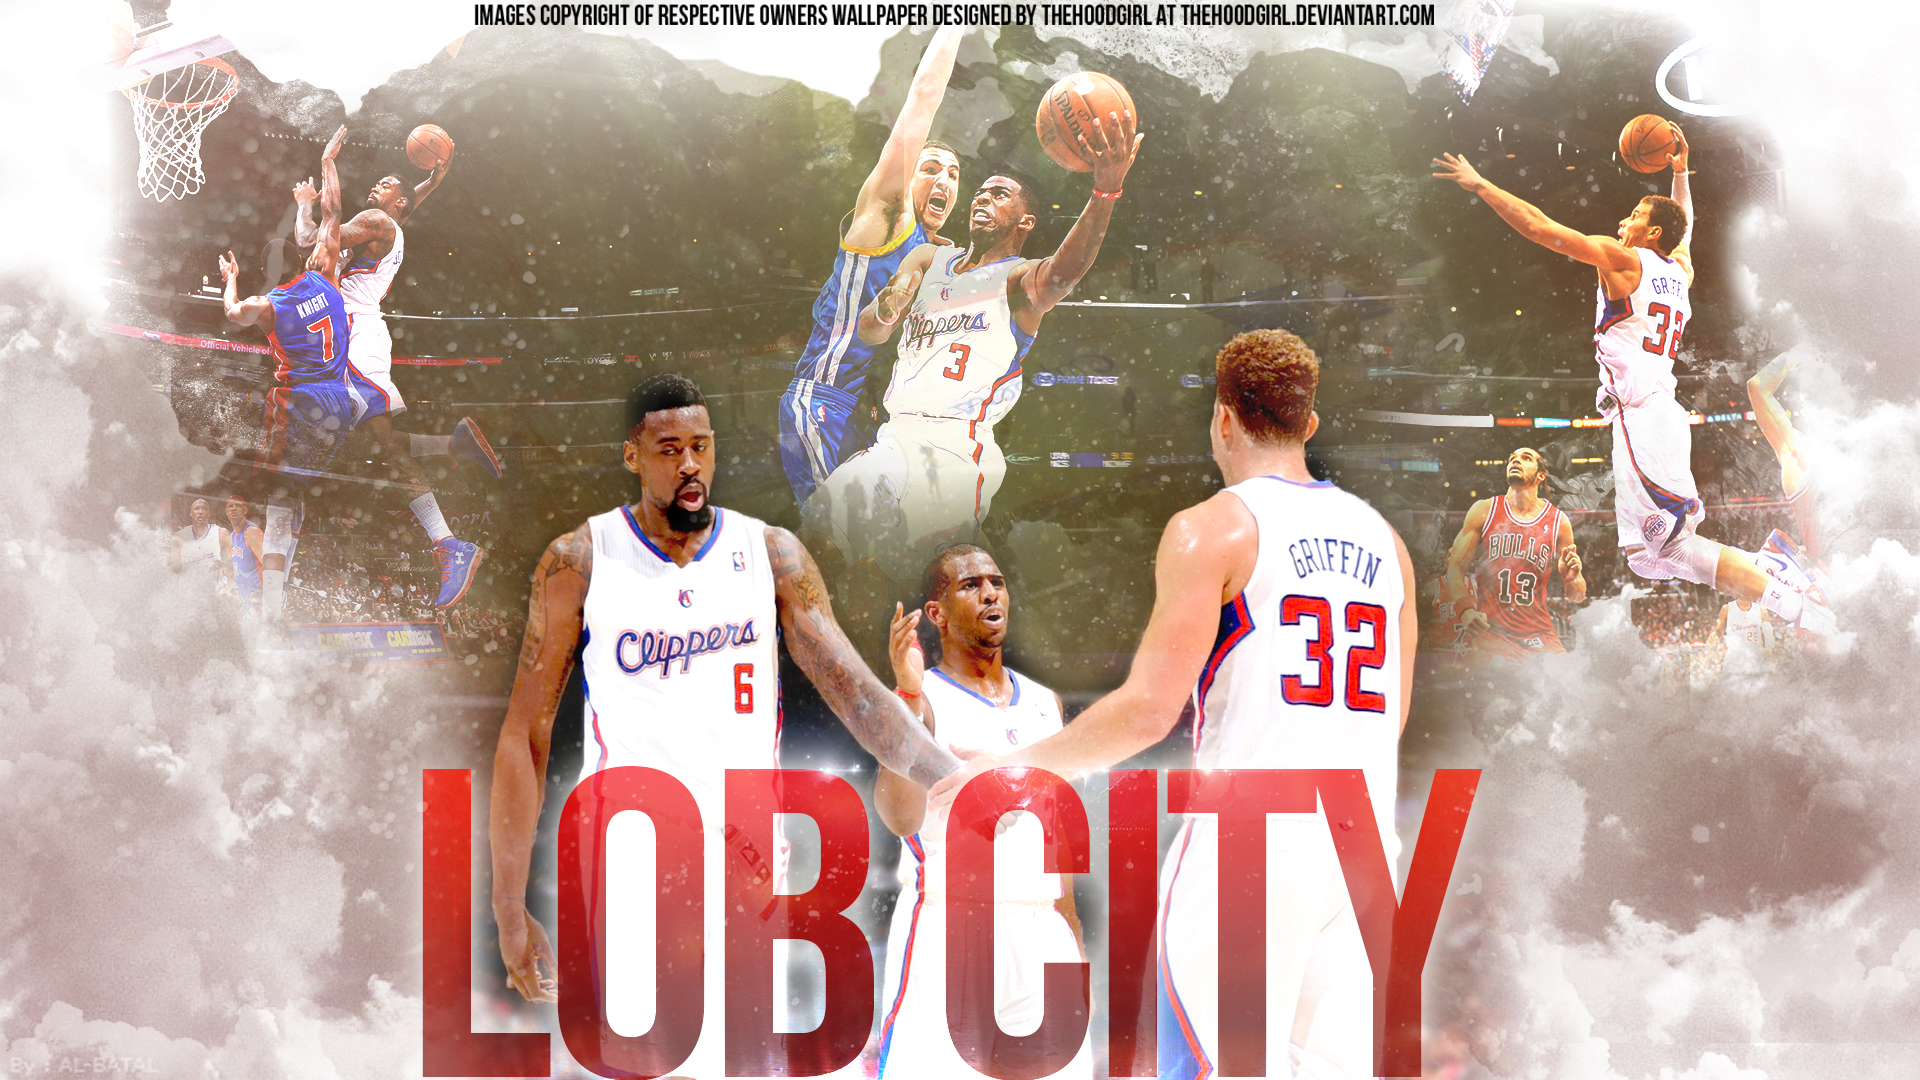 Los Angeles Clippers Lob City Wallpaper By Thehoodgirl On